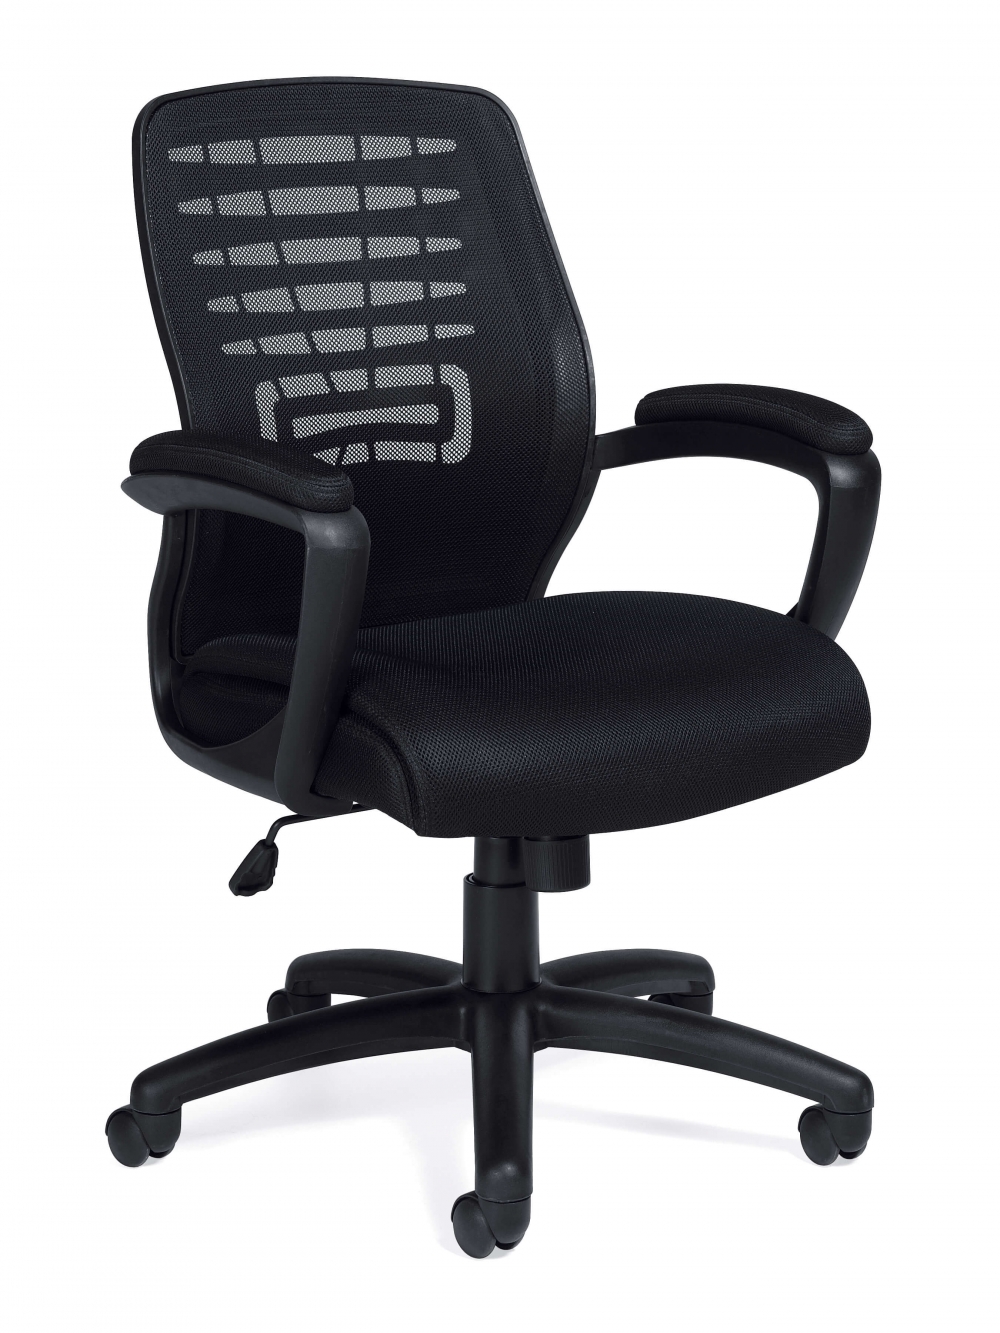 office-furniture-chairs-comfortable-desk-chairs.jpg